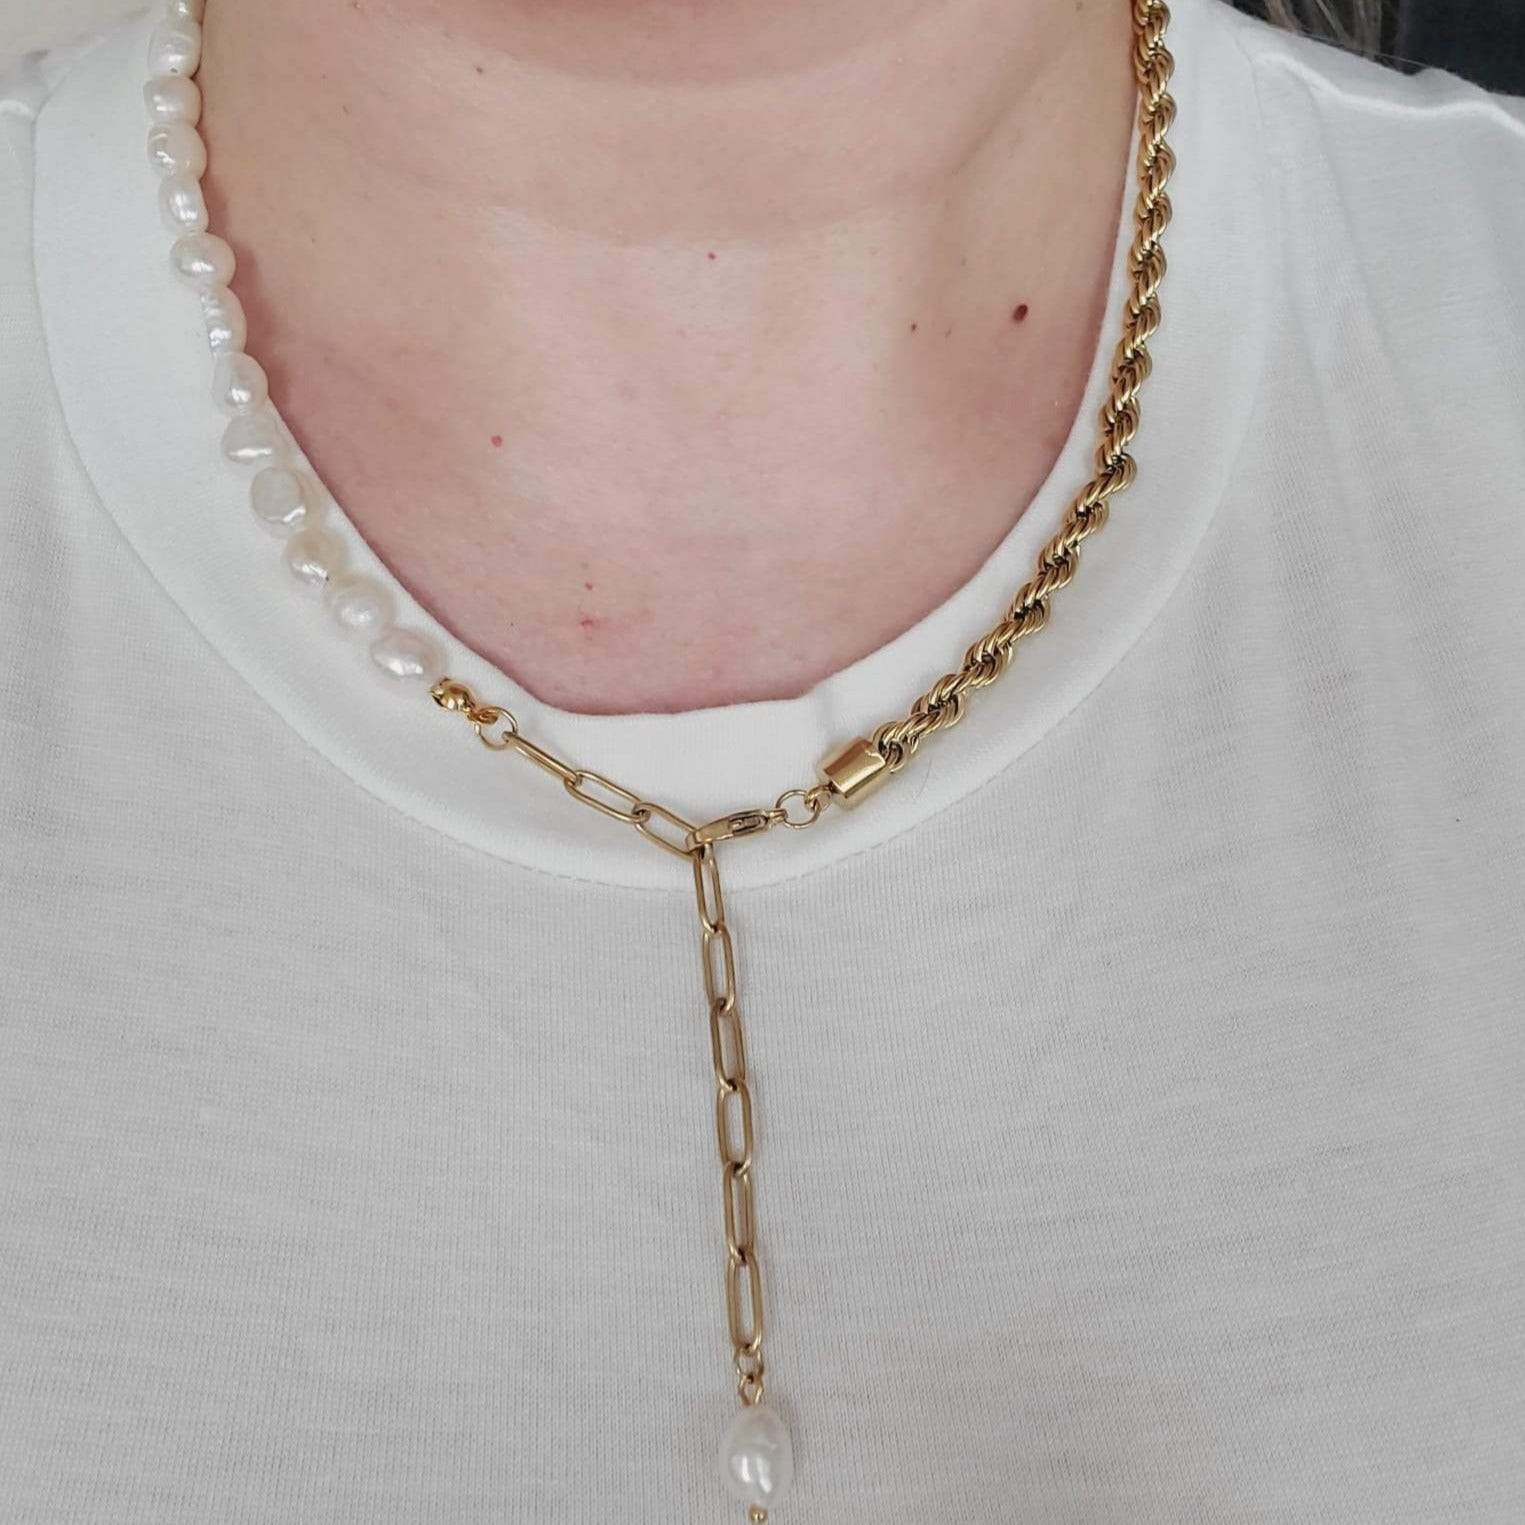 Water Resistant Jewelry, Water Resistant Necklace, Tarnish Free Necklace, Tarnish Free Jewelry, Hypoallergenic Necklace, Hypoallergenic Jewelry, Pearl Necklace, Pearl Jewelry, Hey Harper Jewelry, Missomma Jewelry, Ellie Vail Jewelry, Minimalist Jewelry, Gift for her, Gift for mom, Bold Look